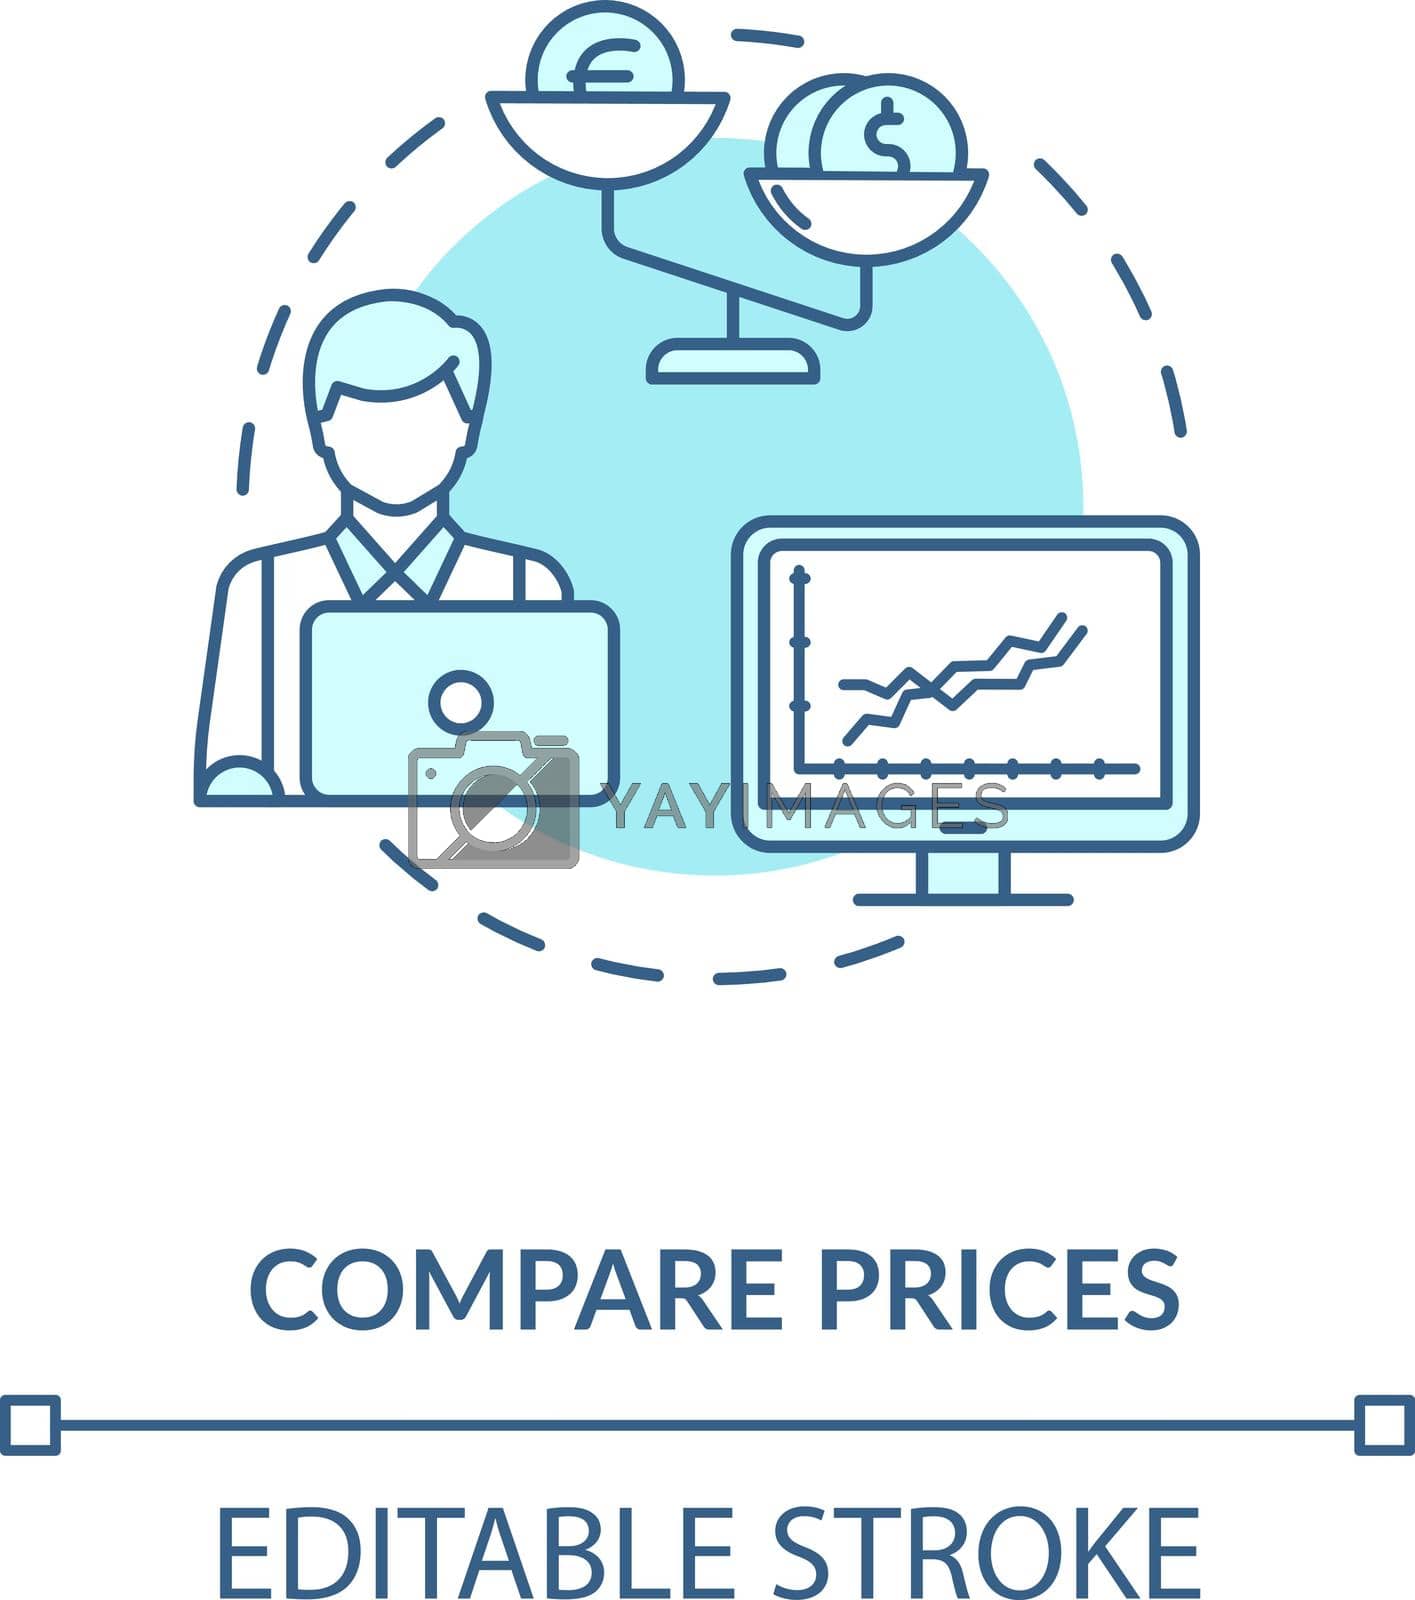 Compare prices concept icon. Helping with money. Wealthy life gained wisdom. Financial advice. Budget saving idea thin line illustration. Vector isolated outline RGB color drawing. Editable stroke